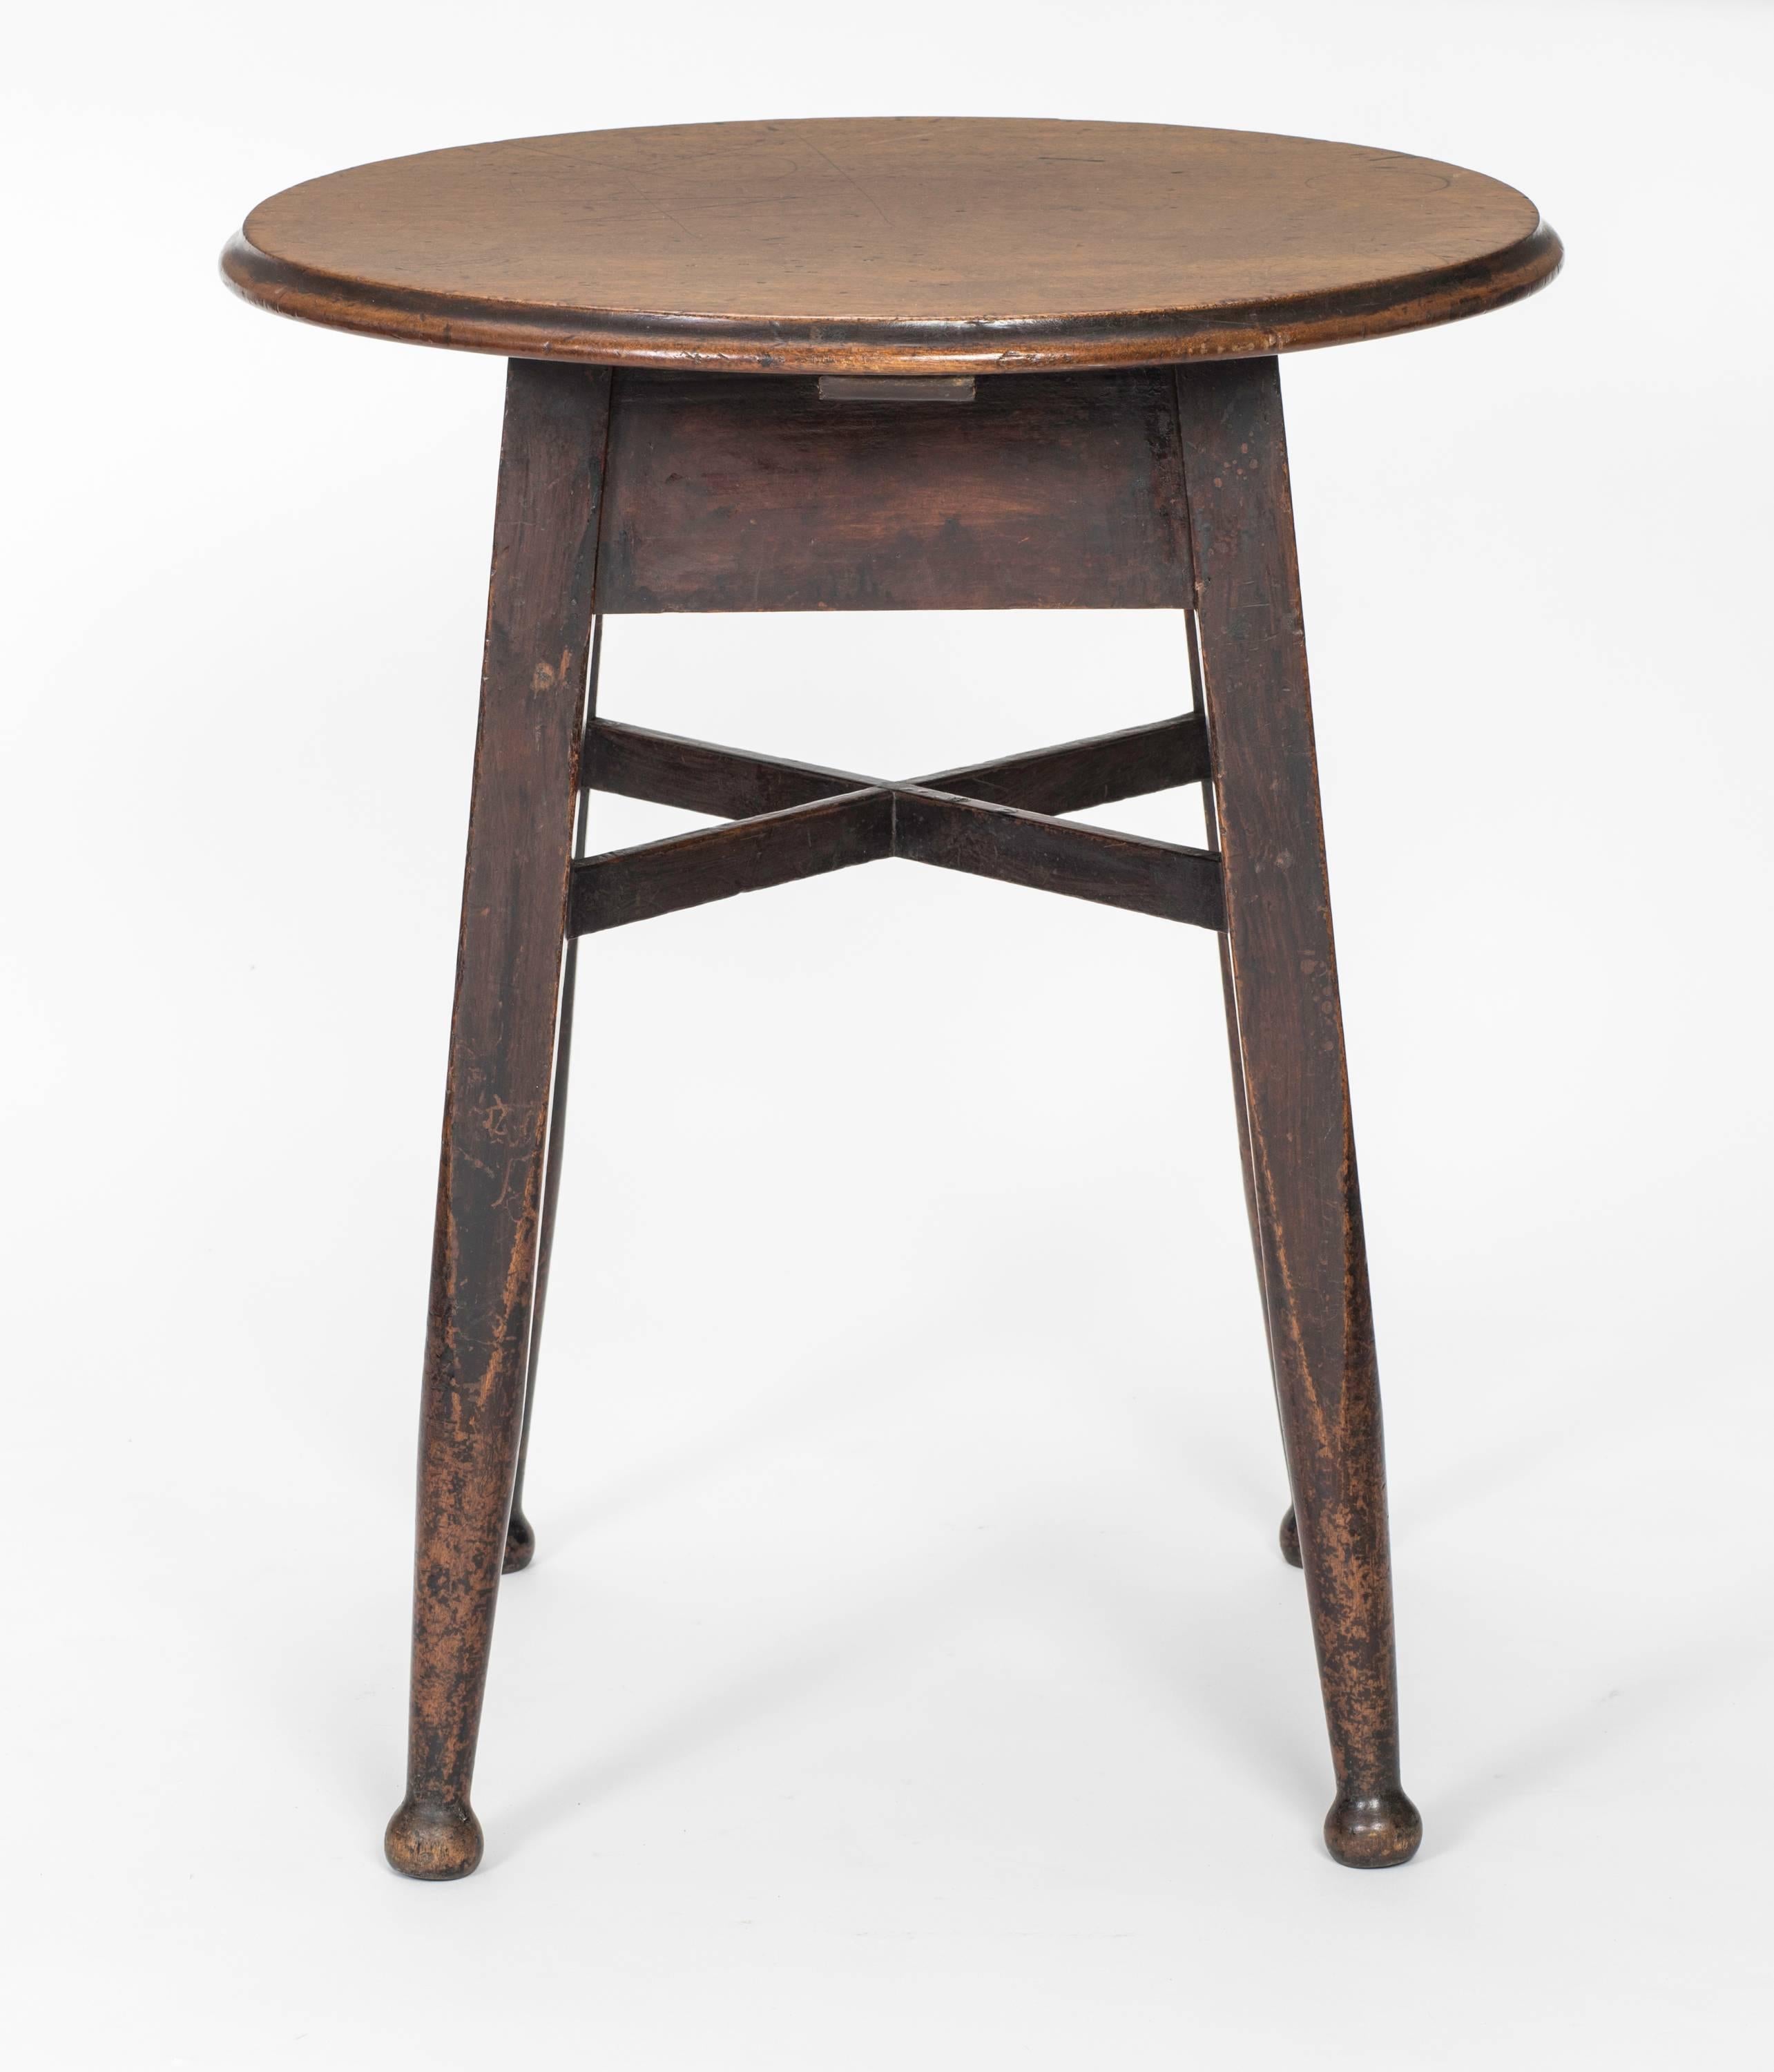 Walnut wood, warmly aged round side table, circa 1900s, England. Supported by four tapered legs with cross bar stretchers and small bun feet. Very charming table.